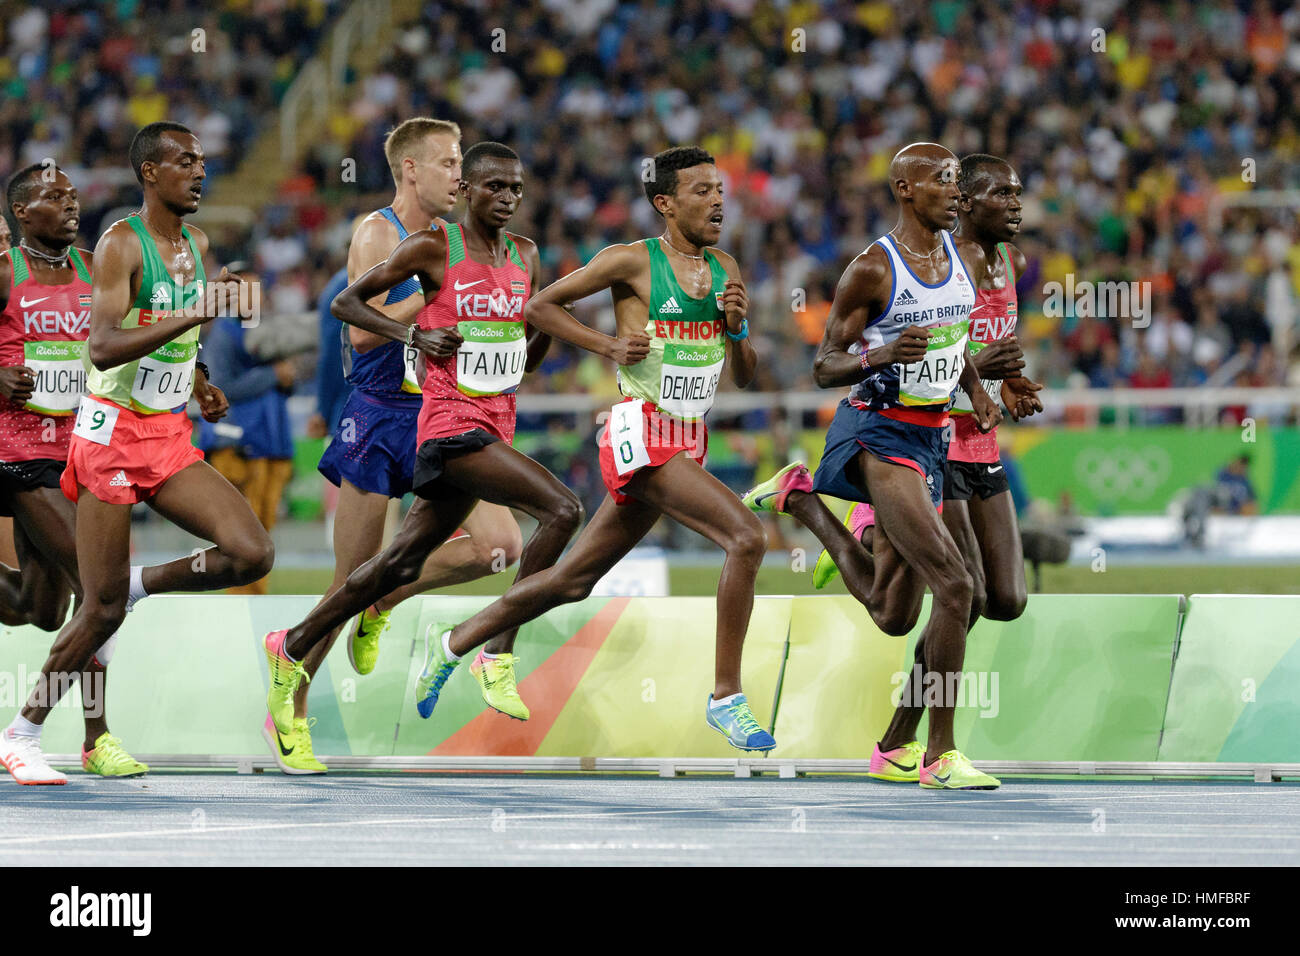 Rio de Janeiro, Brazil. 13 August 2016. Mo Farah (GBR) wins the gold medal in the Men's 10,000m at the 2016 Olympic Summer Games. ©Paul J. Sutton/PCN Stock Photo